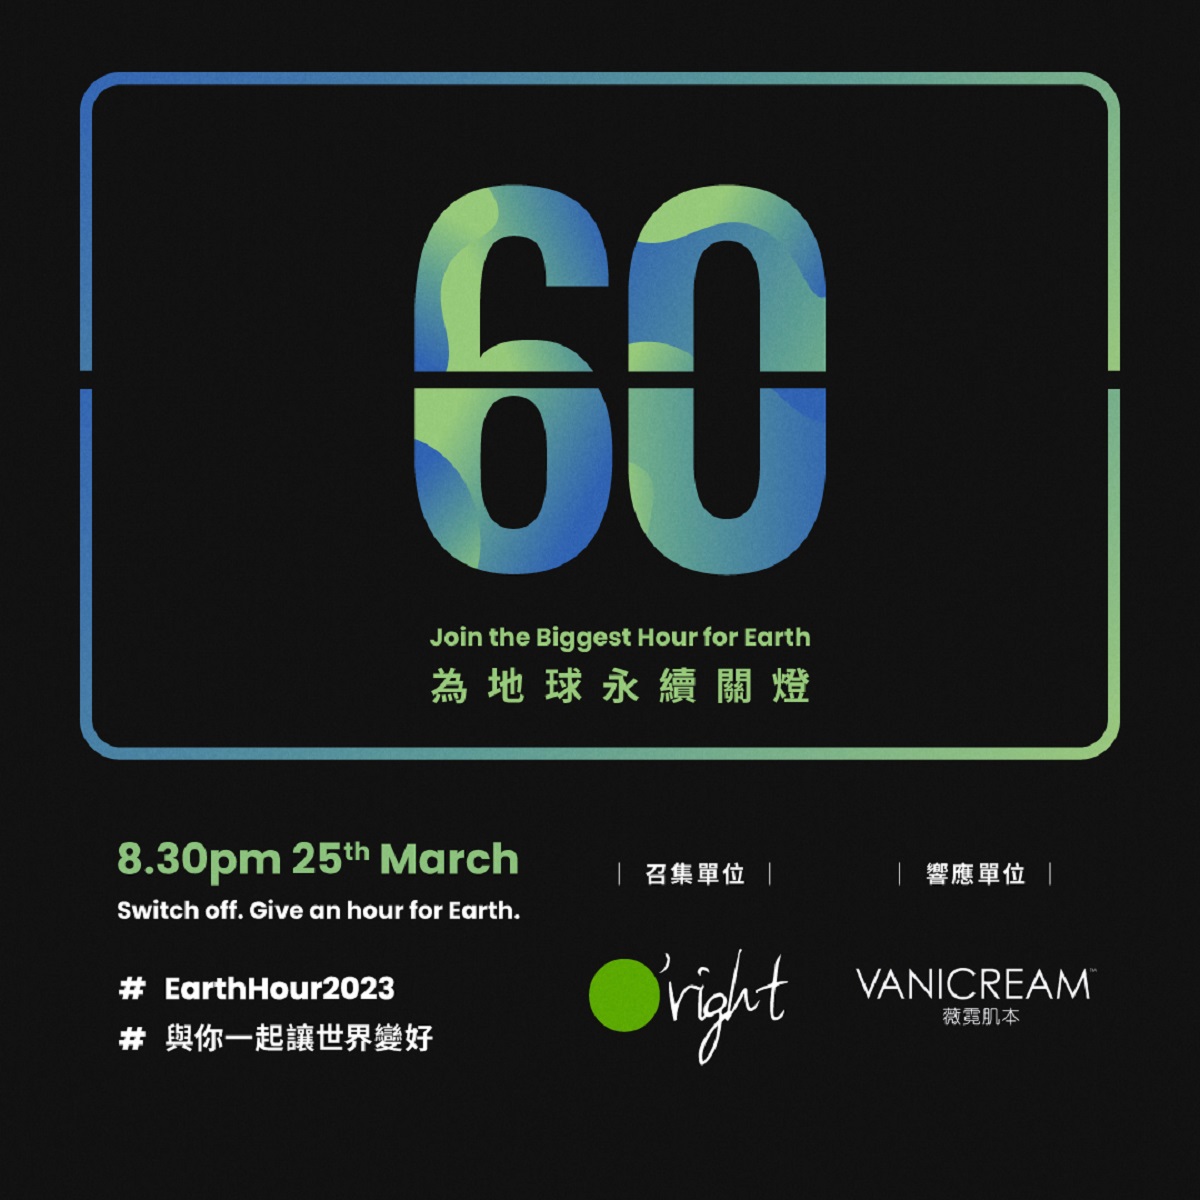 Vanicream薇霓肌本邀請大家共同響應3/25(六)晚上20:30-21:30一起關燈1小時與你一起讓世界變好switch off give an hour for earth,為地球永續關燈join the biggest hour for earth